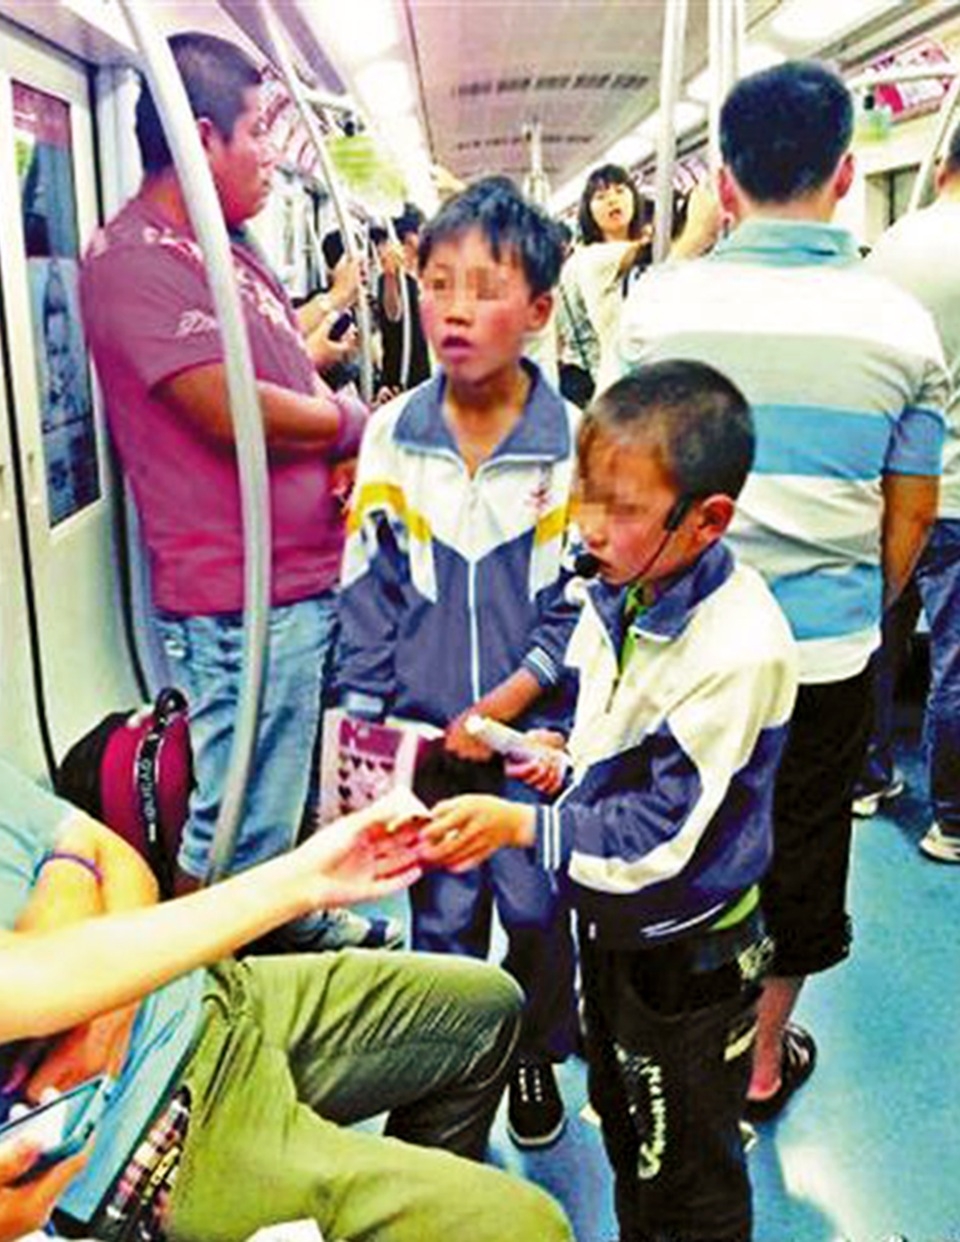 Children ask for money on a subway. Beijing is cracking down on panhandling inside the trains and stations. Photo: SCMP Pictures 